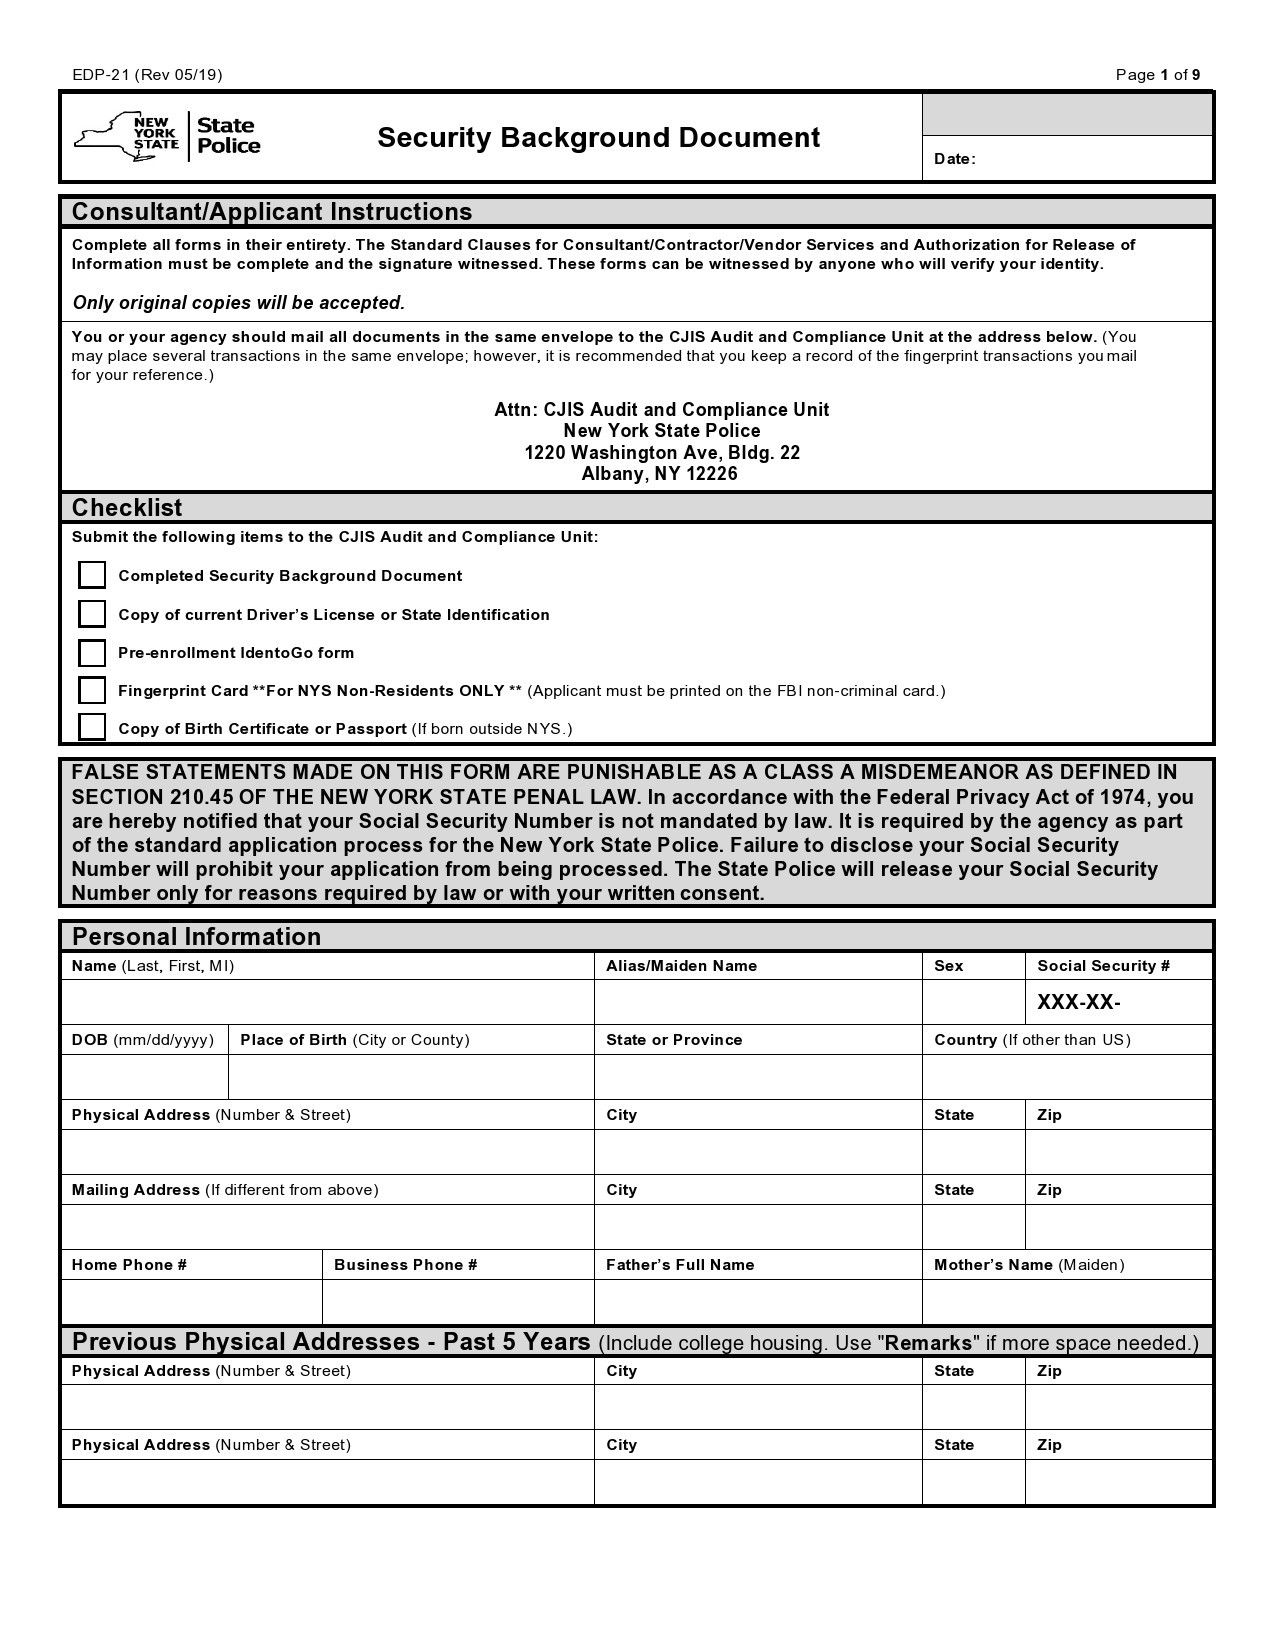 Free background check form 13